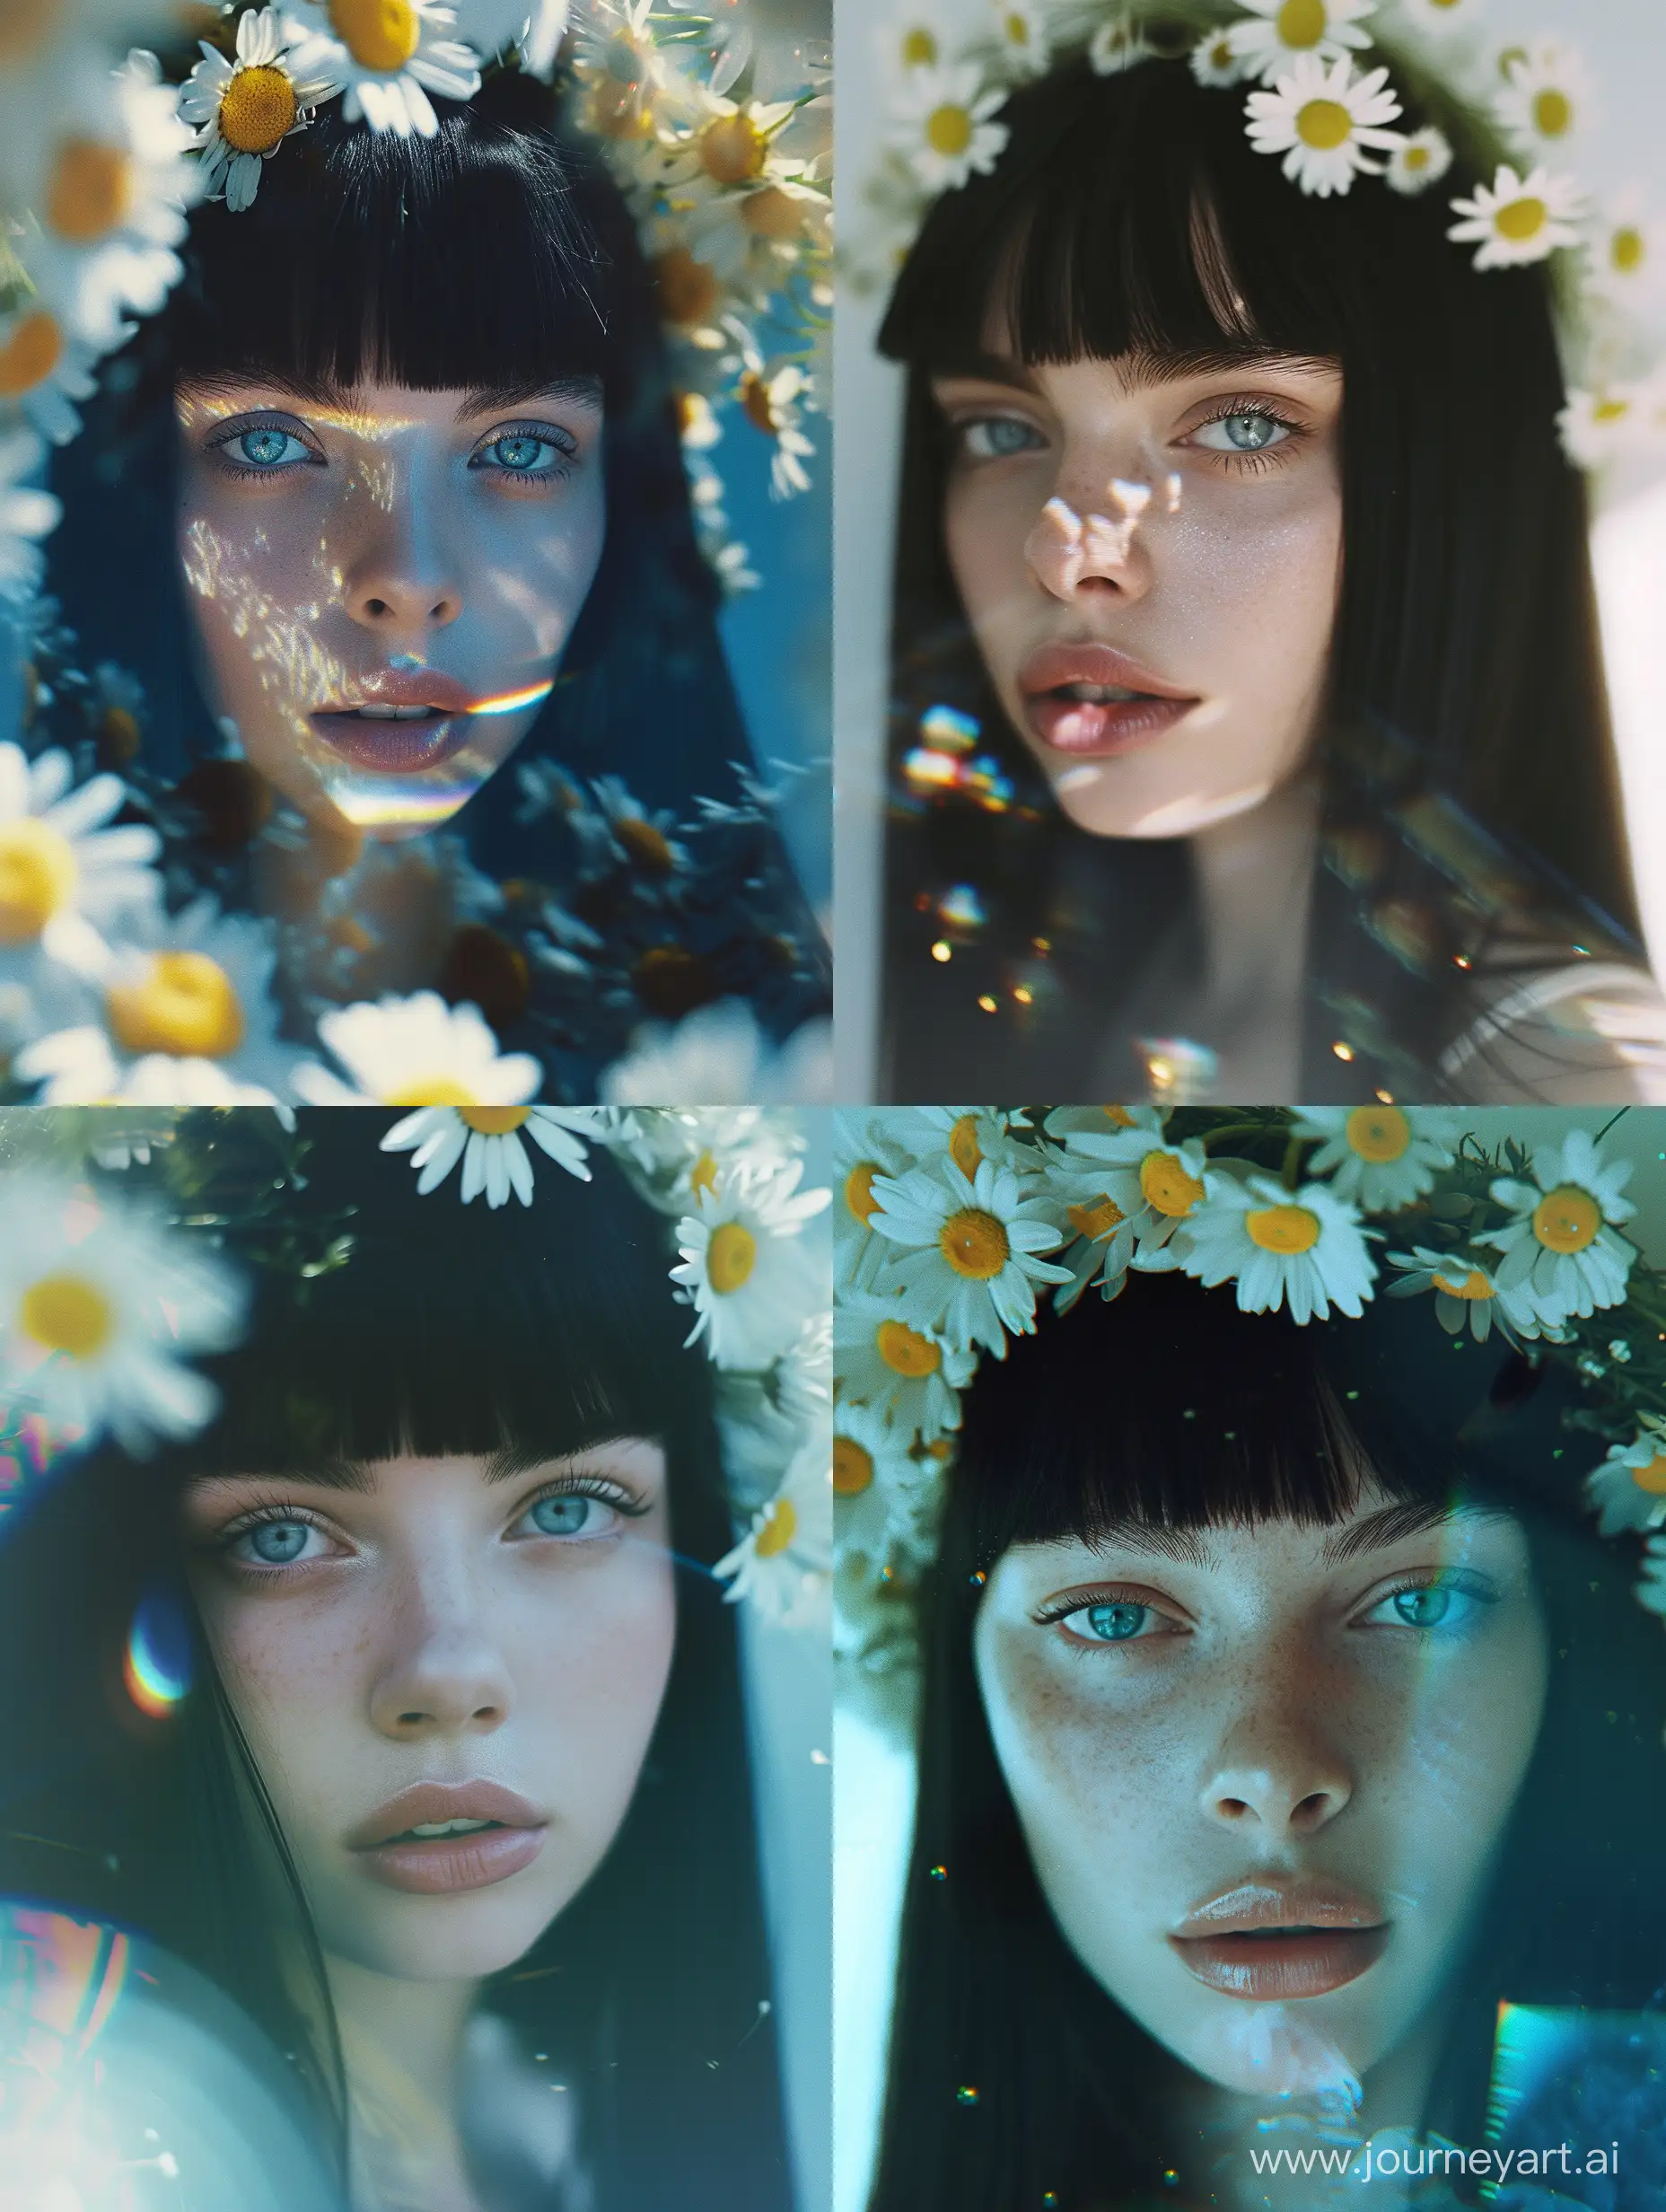 Ethereal-Beauty-Woman-with-Black-Hair-and-Daisy-Wreath-Captured-through-a-Prism